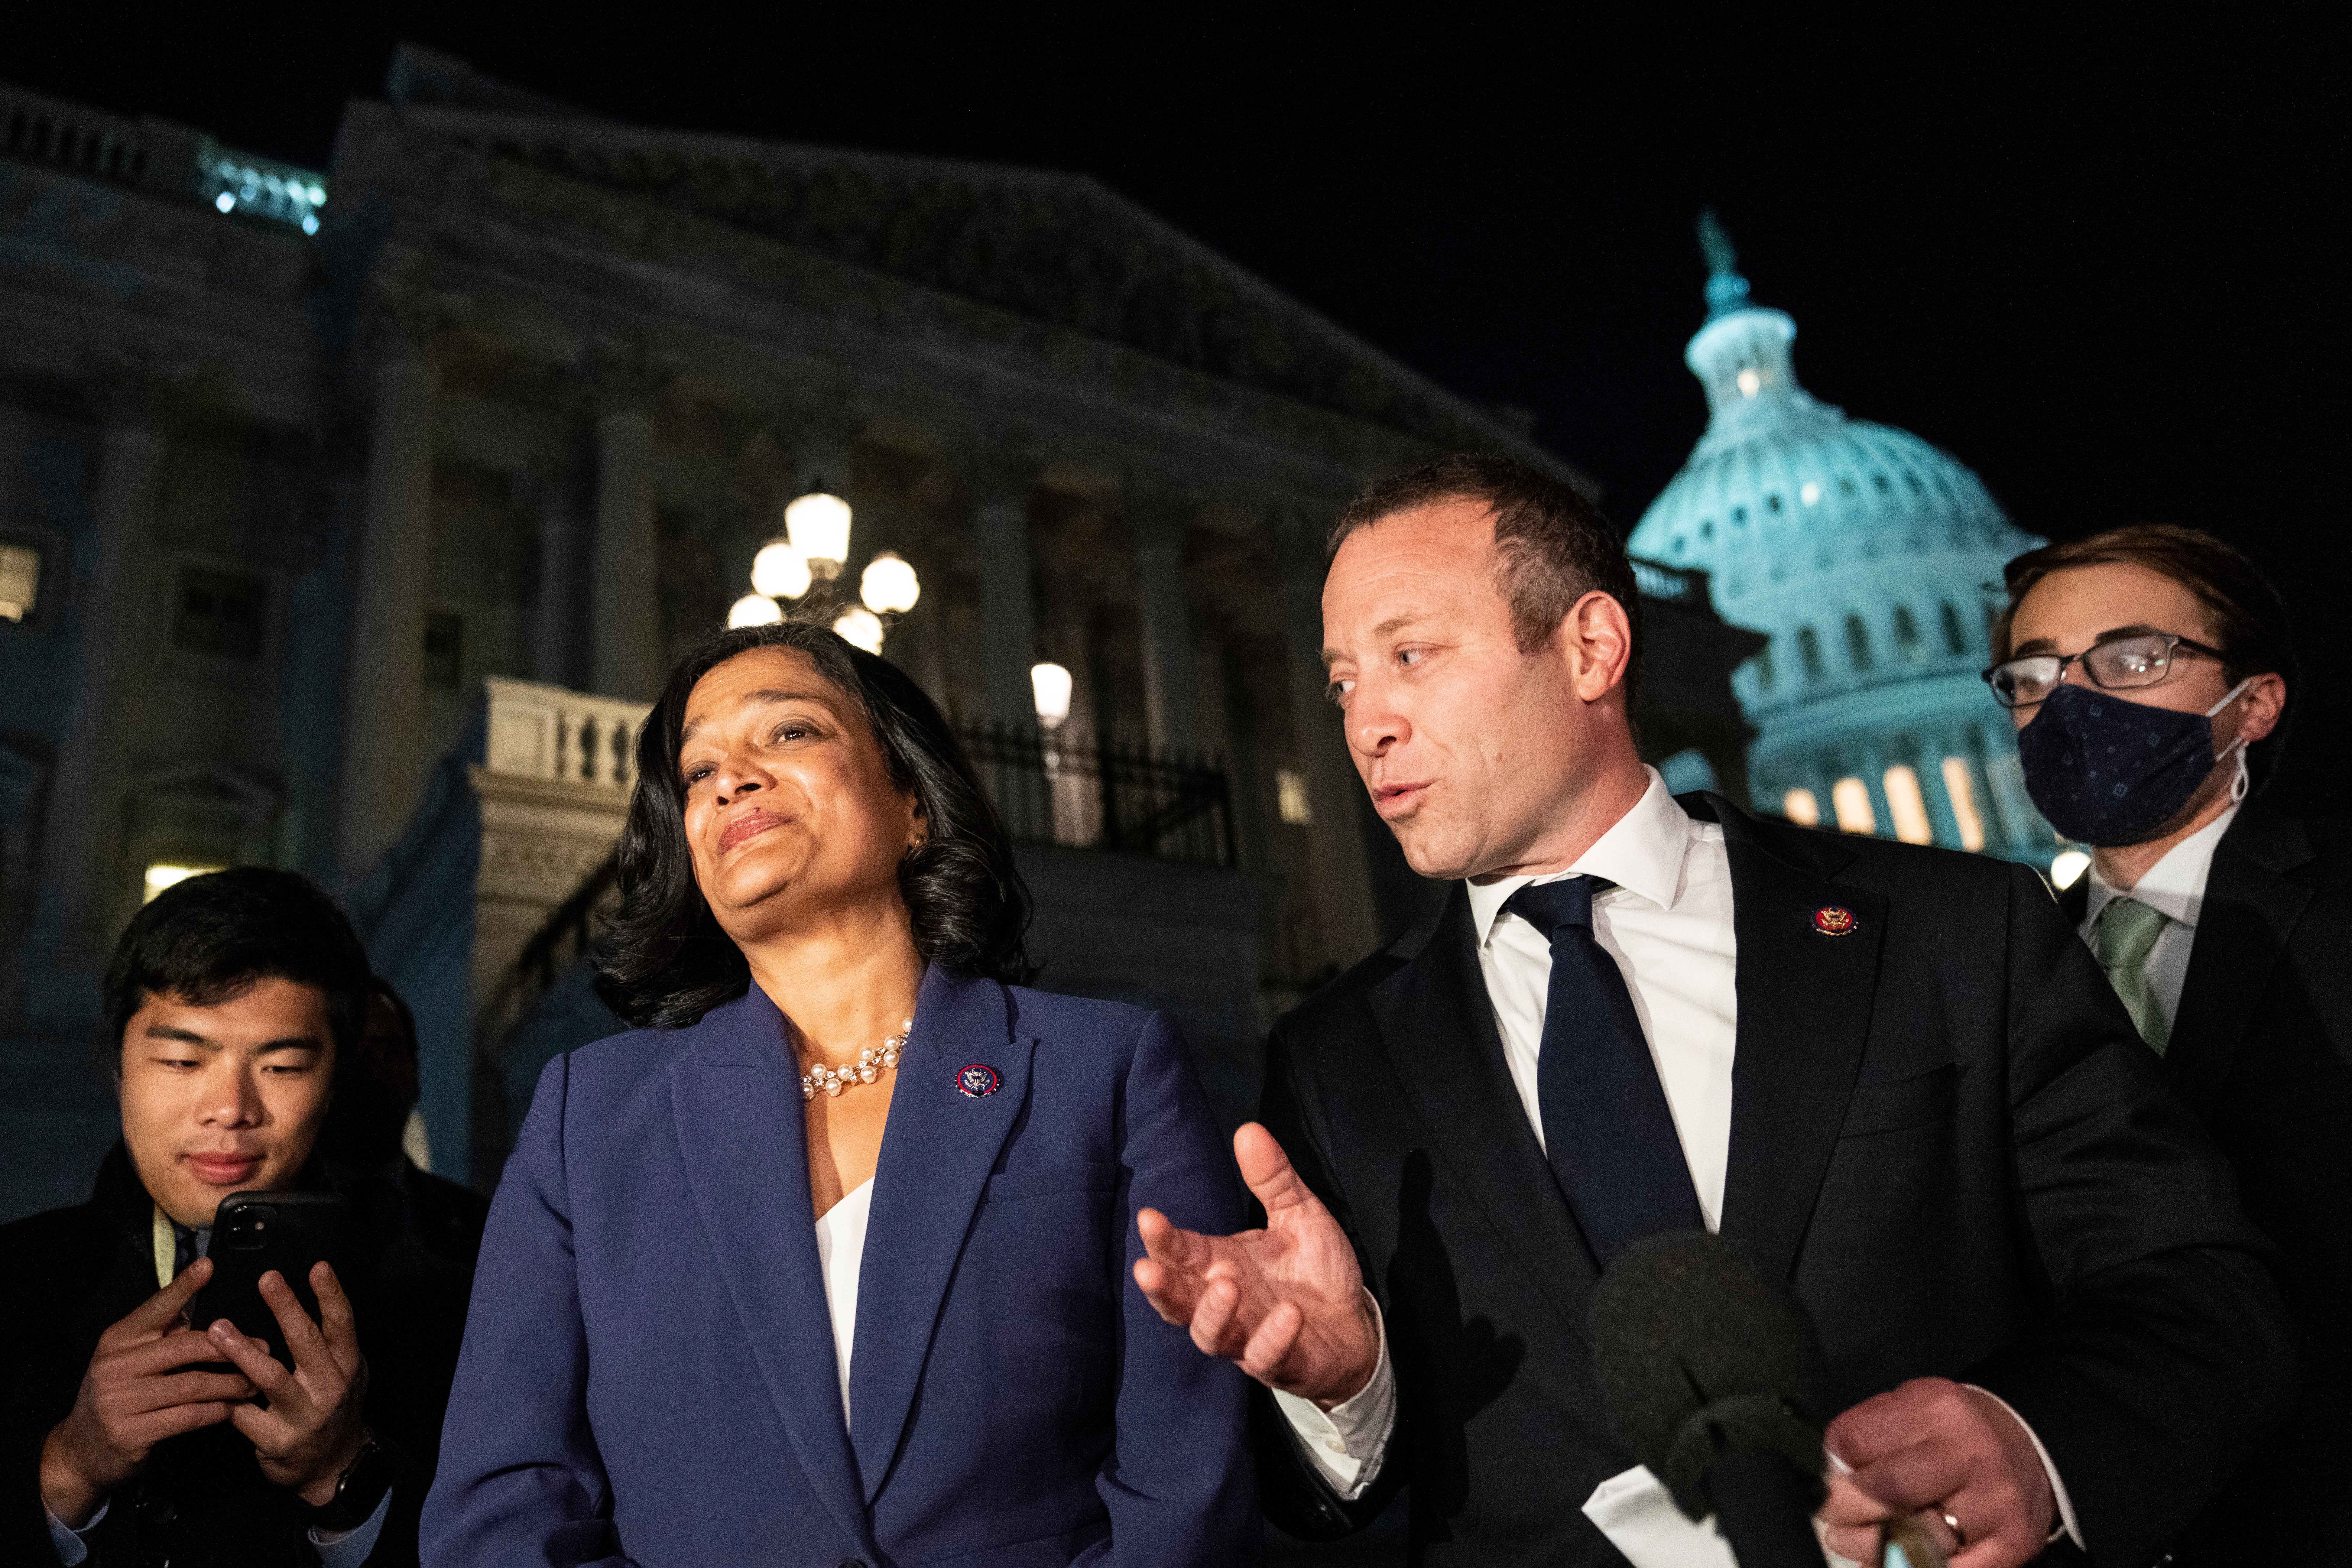 Rep Pramila Jayapal (D-WA) and Rep Josh Gottheimer (D-NJ) speak to reporters outside the US Capitol to announce a deal between Progressive House Democrats and Moderate House Democrats